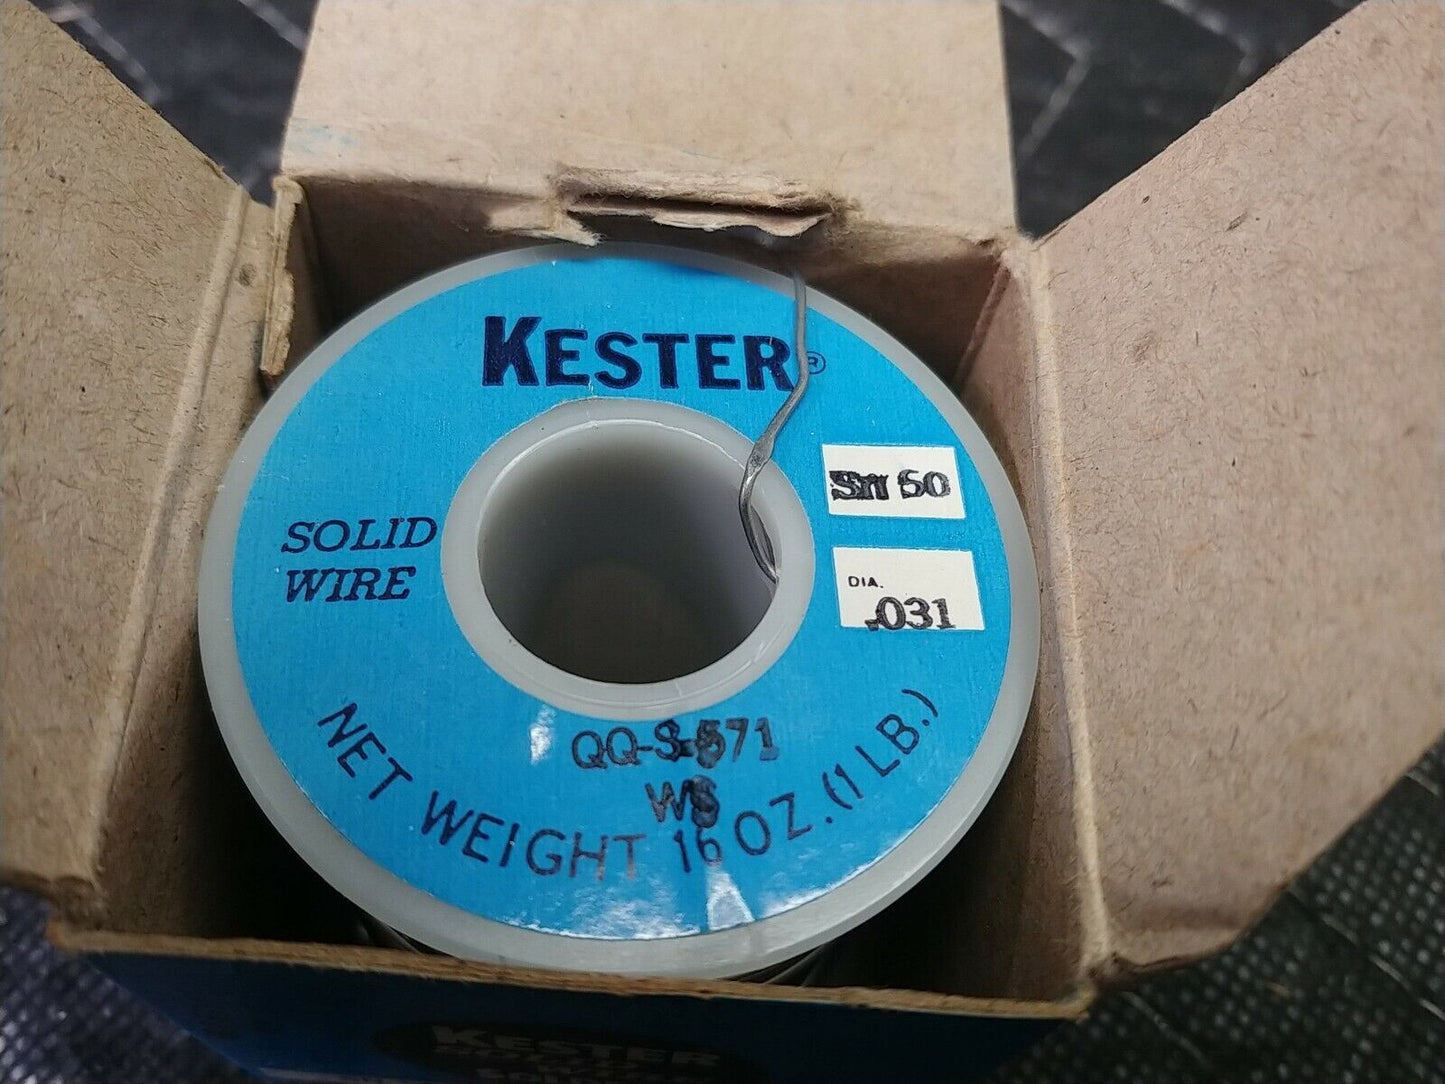 Kester Solid Wire Solder Alloy Sn50 .031" Diameter QQ-S-571 WS 41235